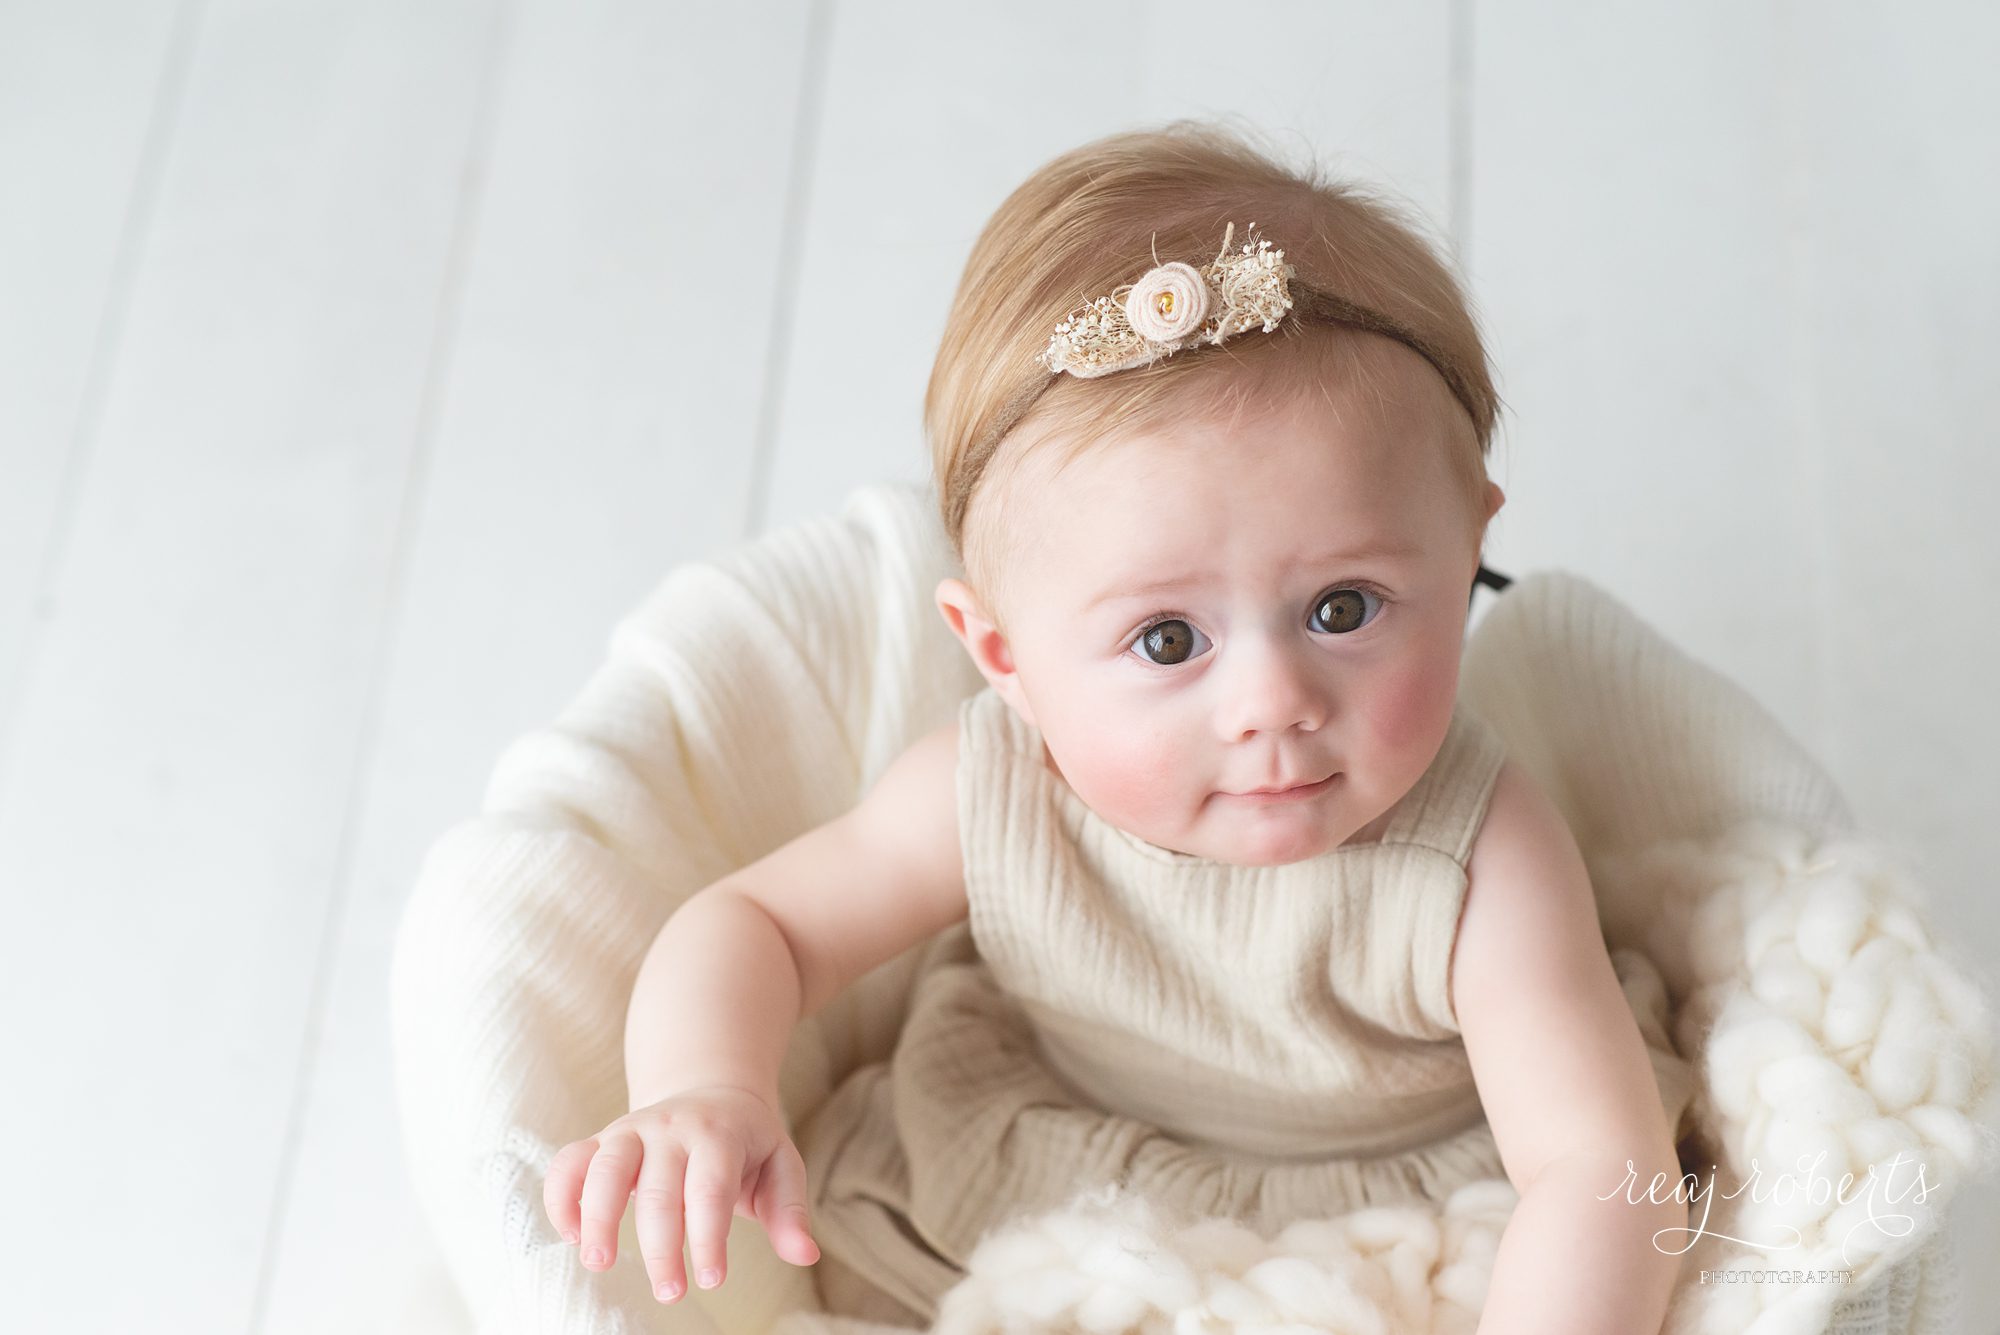 6 month baby picture ideas girl neutral colors | Reaj Roberts Photography